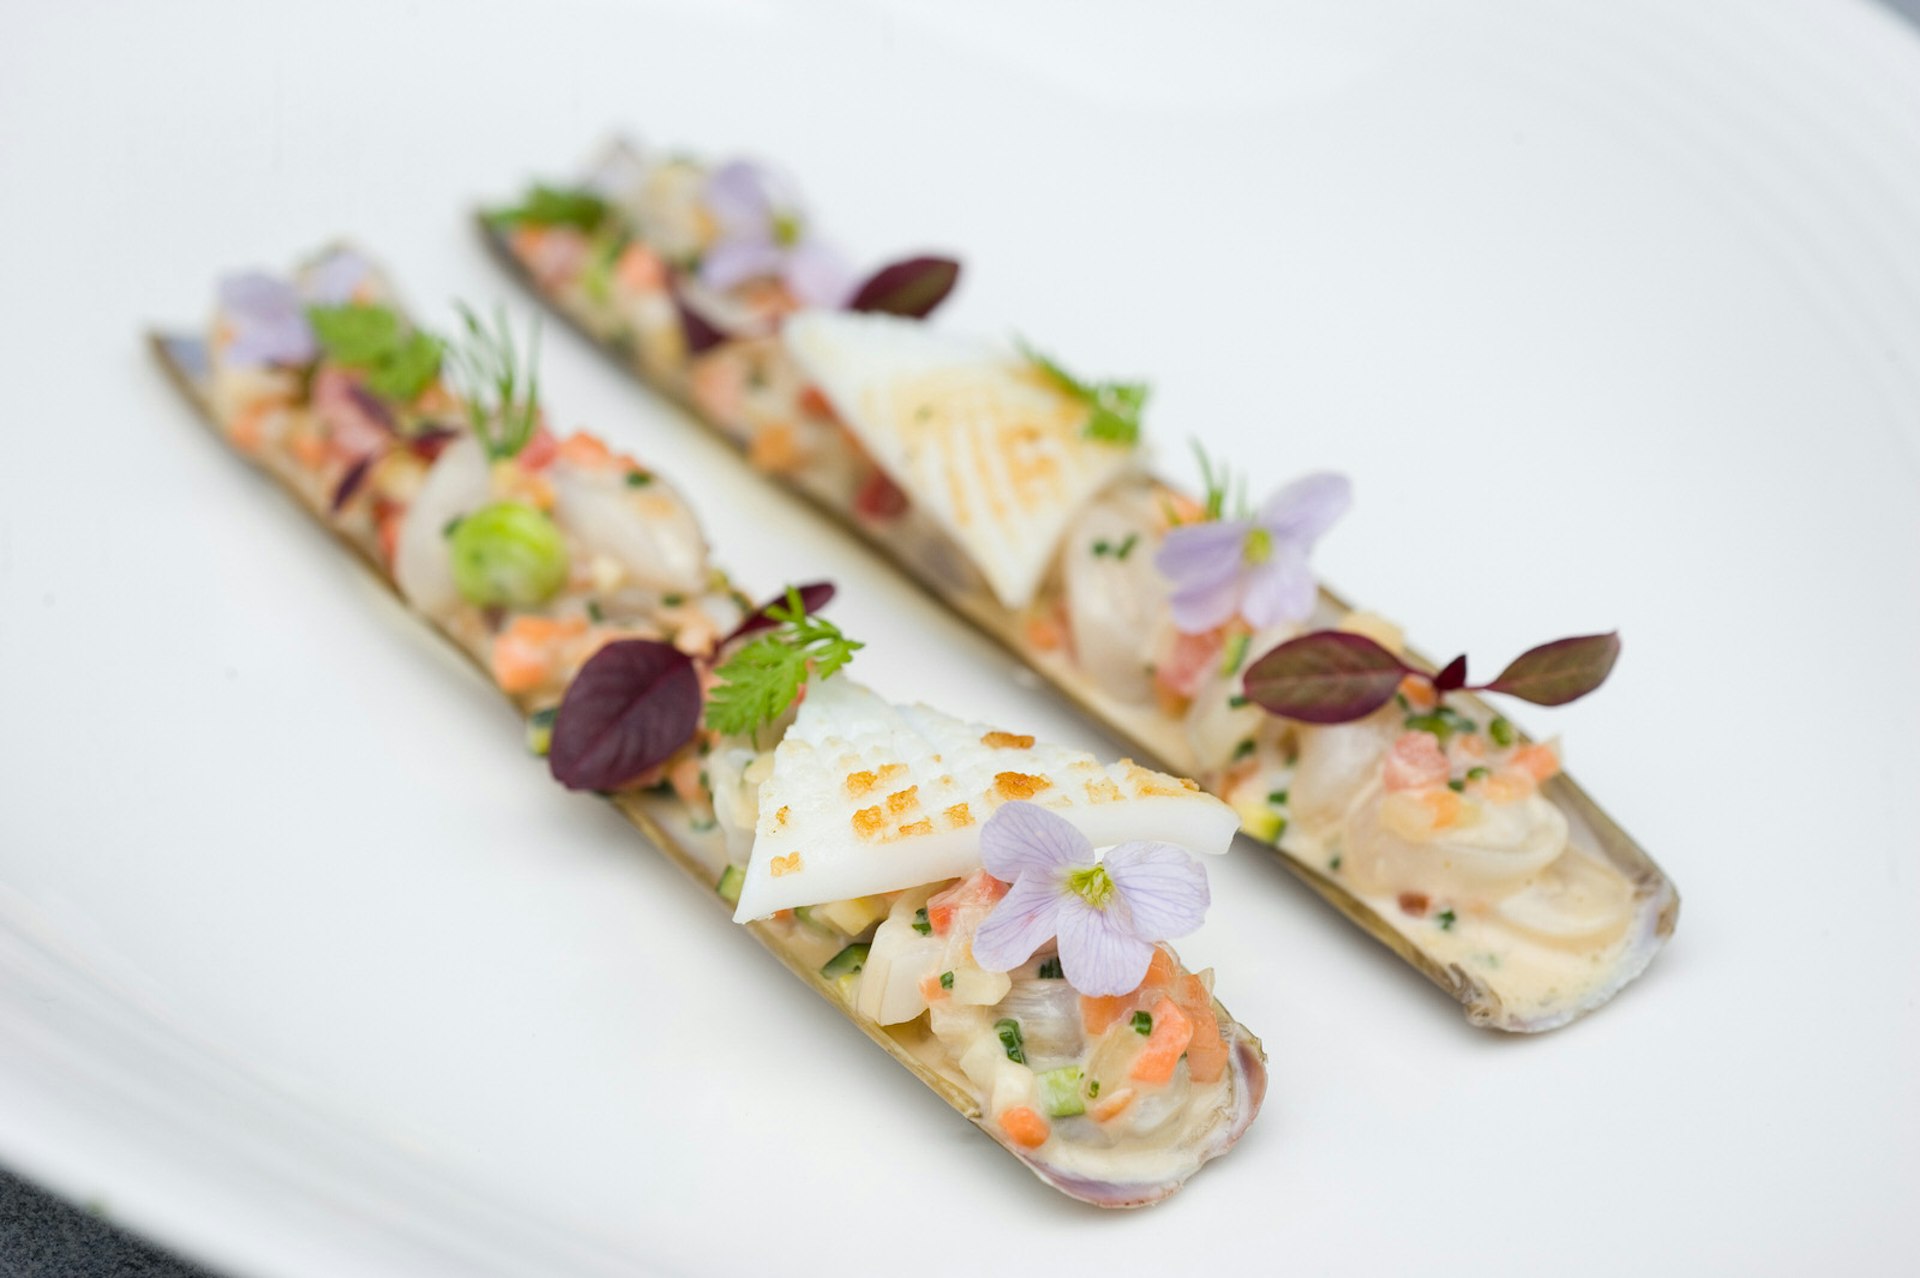 The Kitchin's foodie highlights include razor clams © The Kitchin